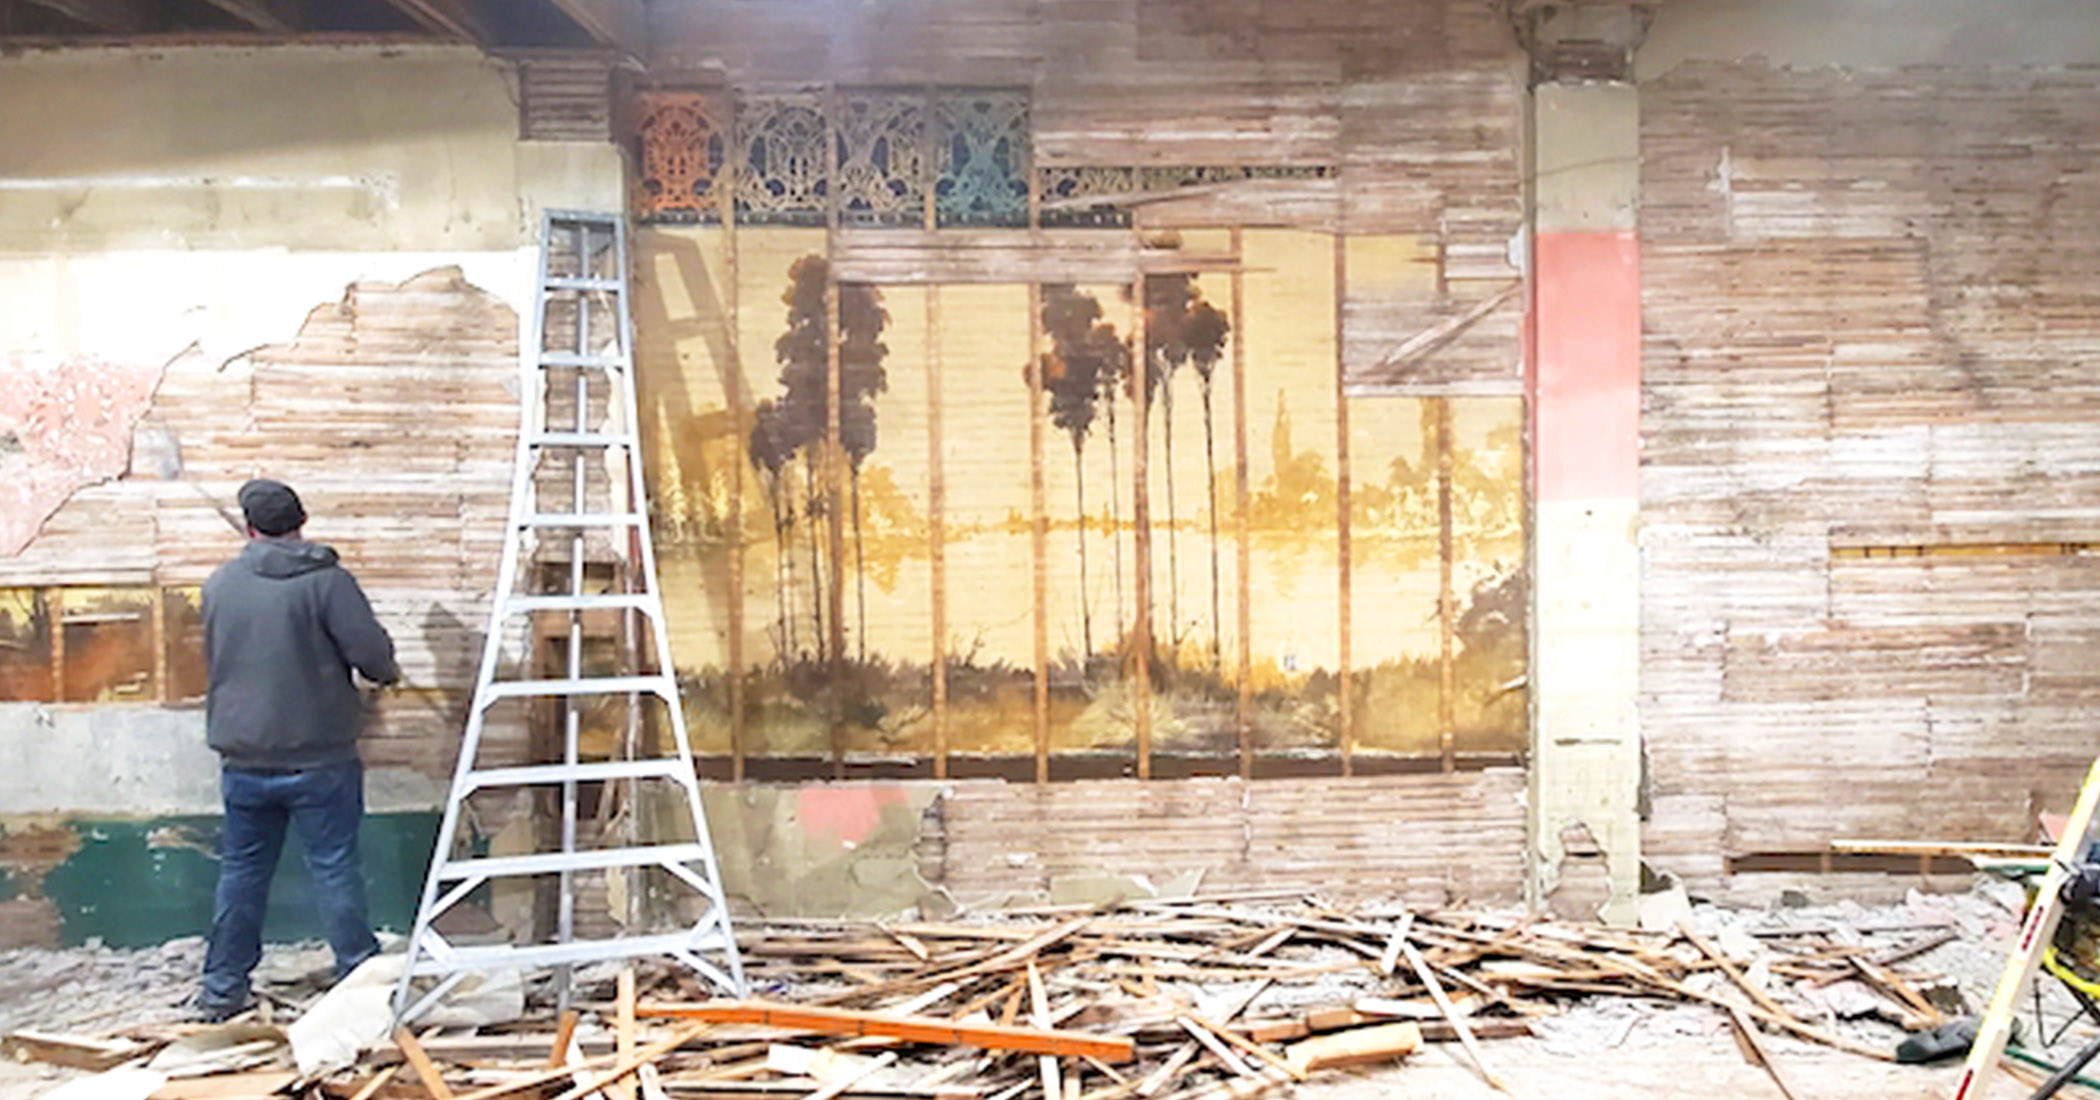  Couple Renovating Dilapidated Old Building Stumble on 60-Foot Century-Old Murals Hidden Behind the Walls 